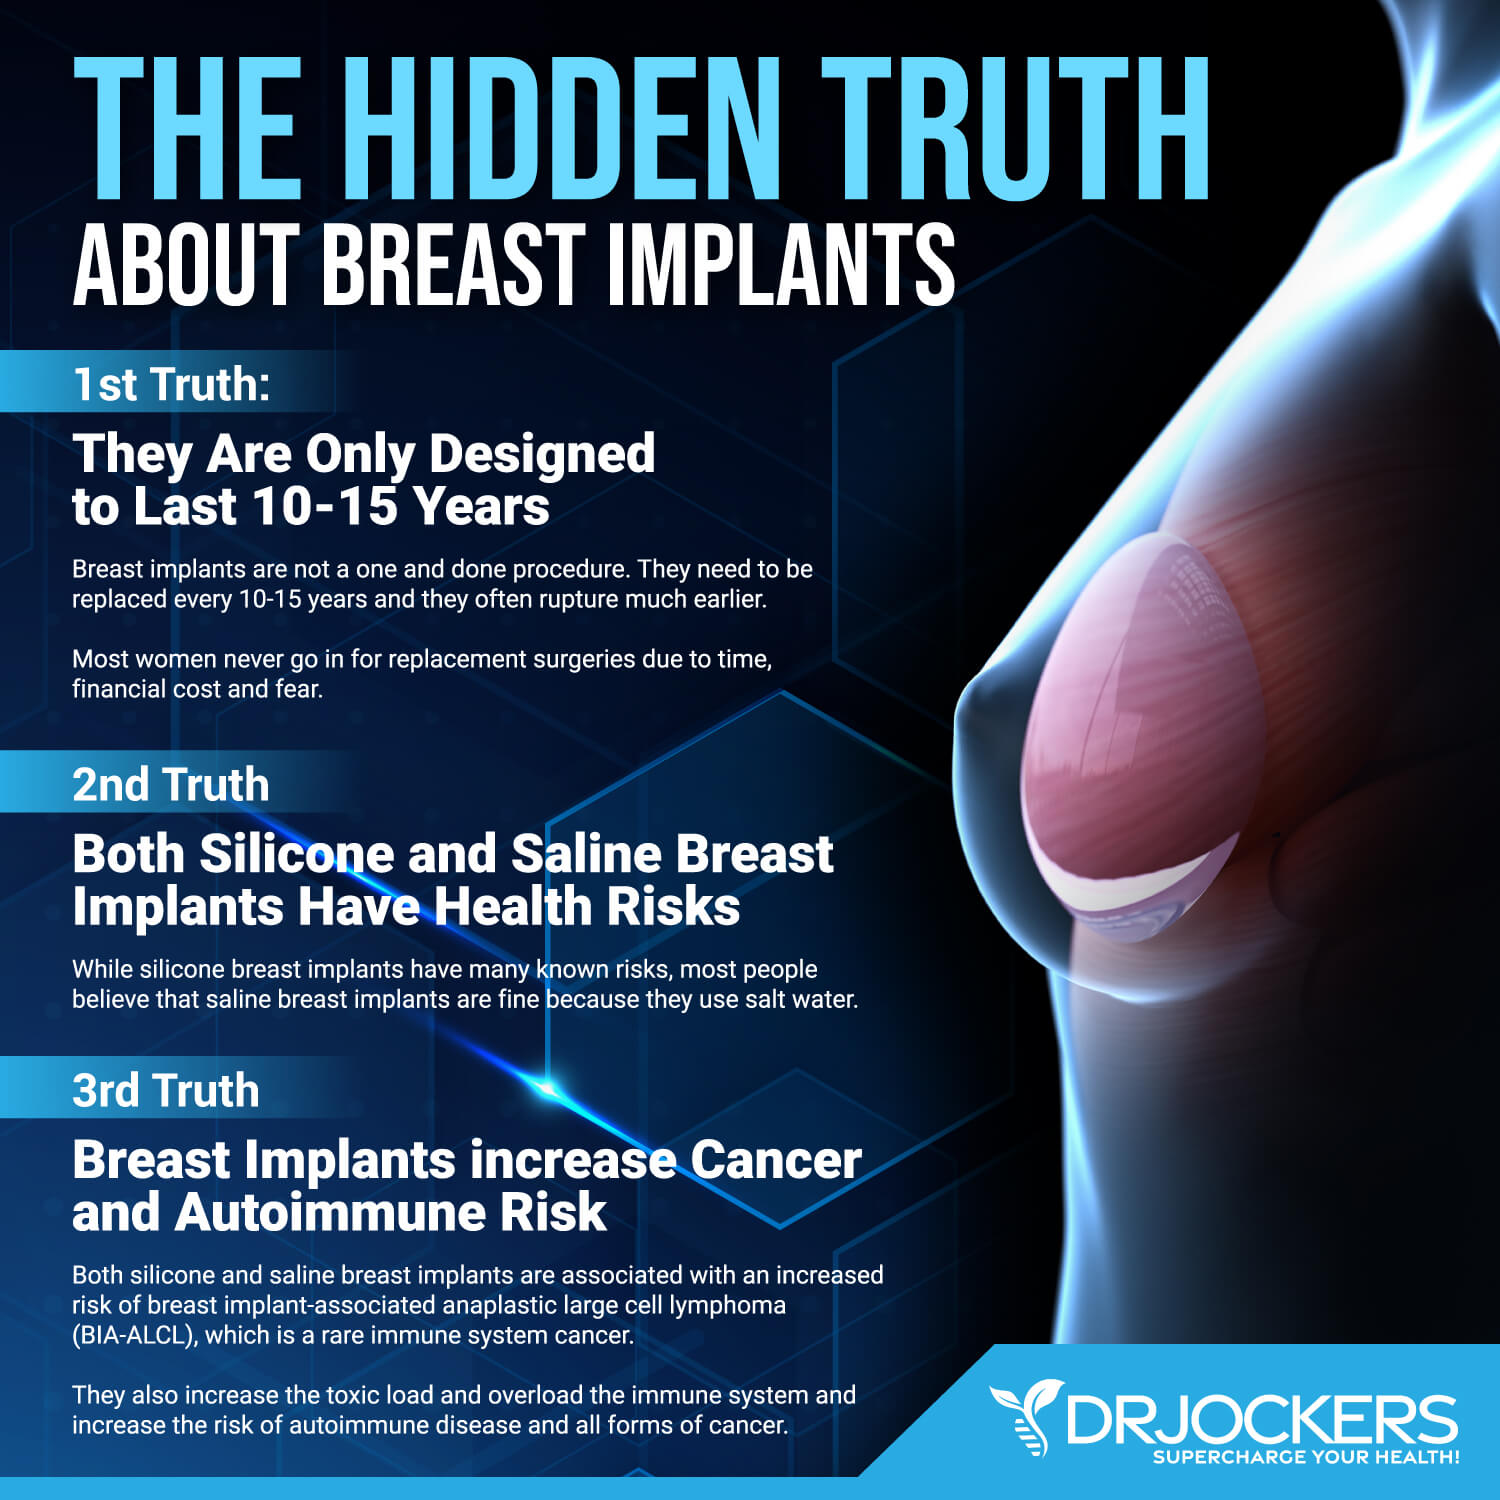 Silicone Breast Implants Increase Women's Risk of Many Health Diseases